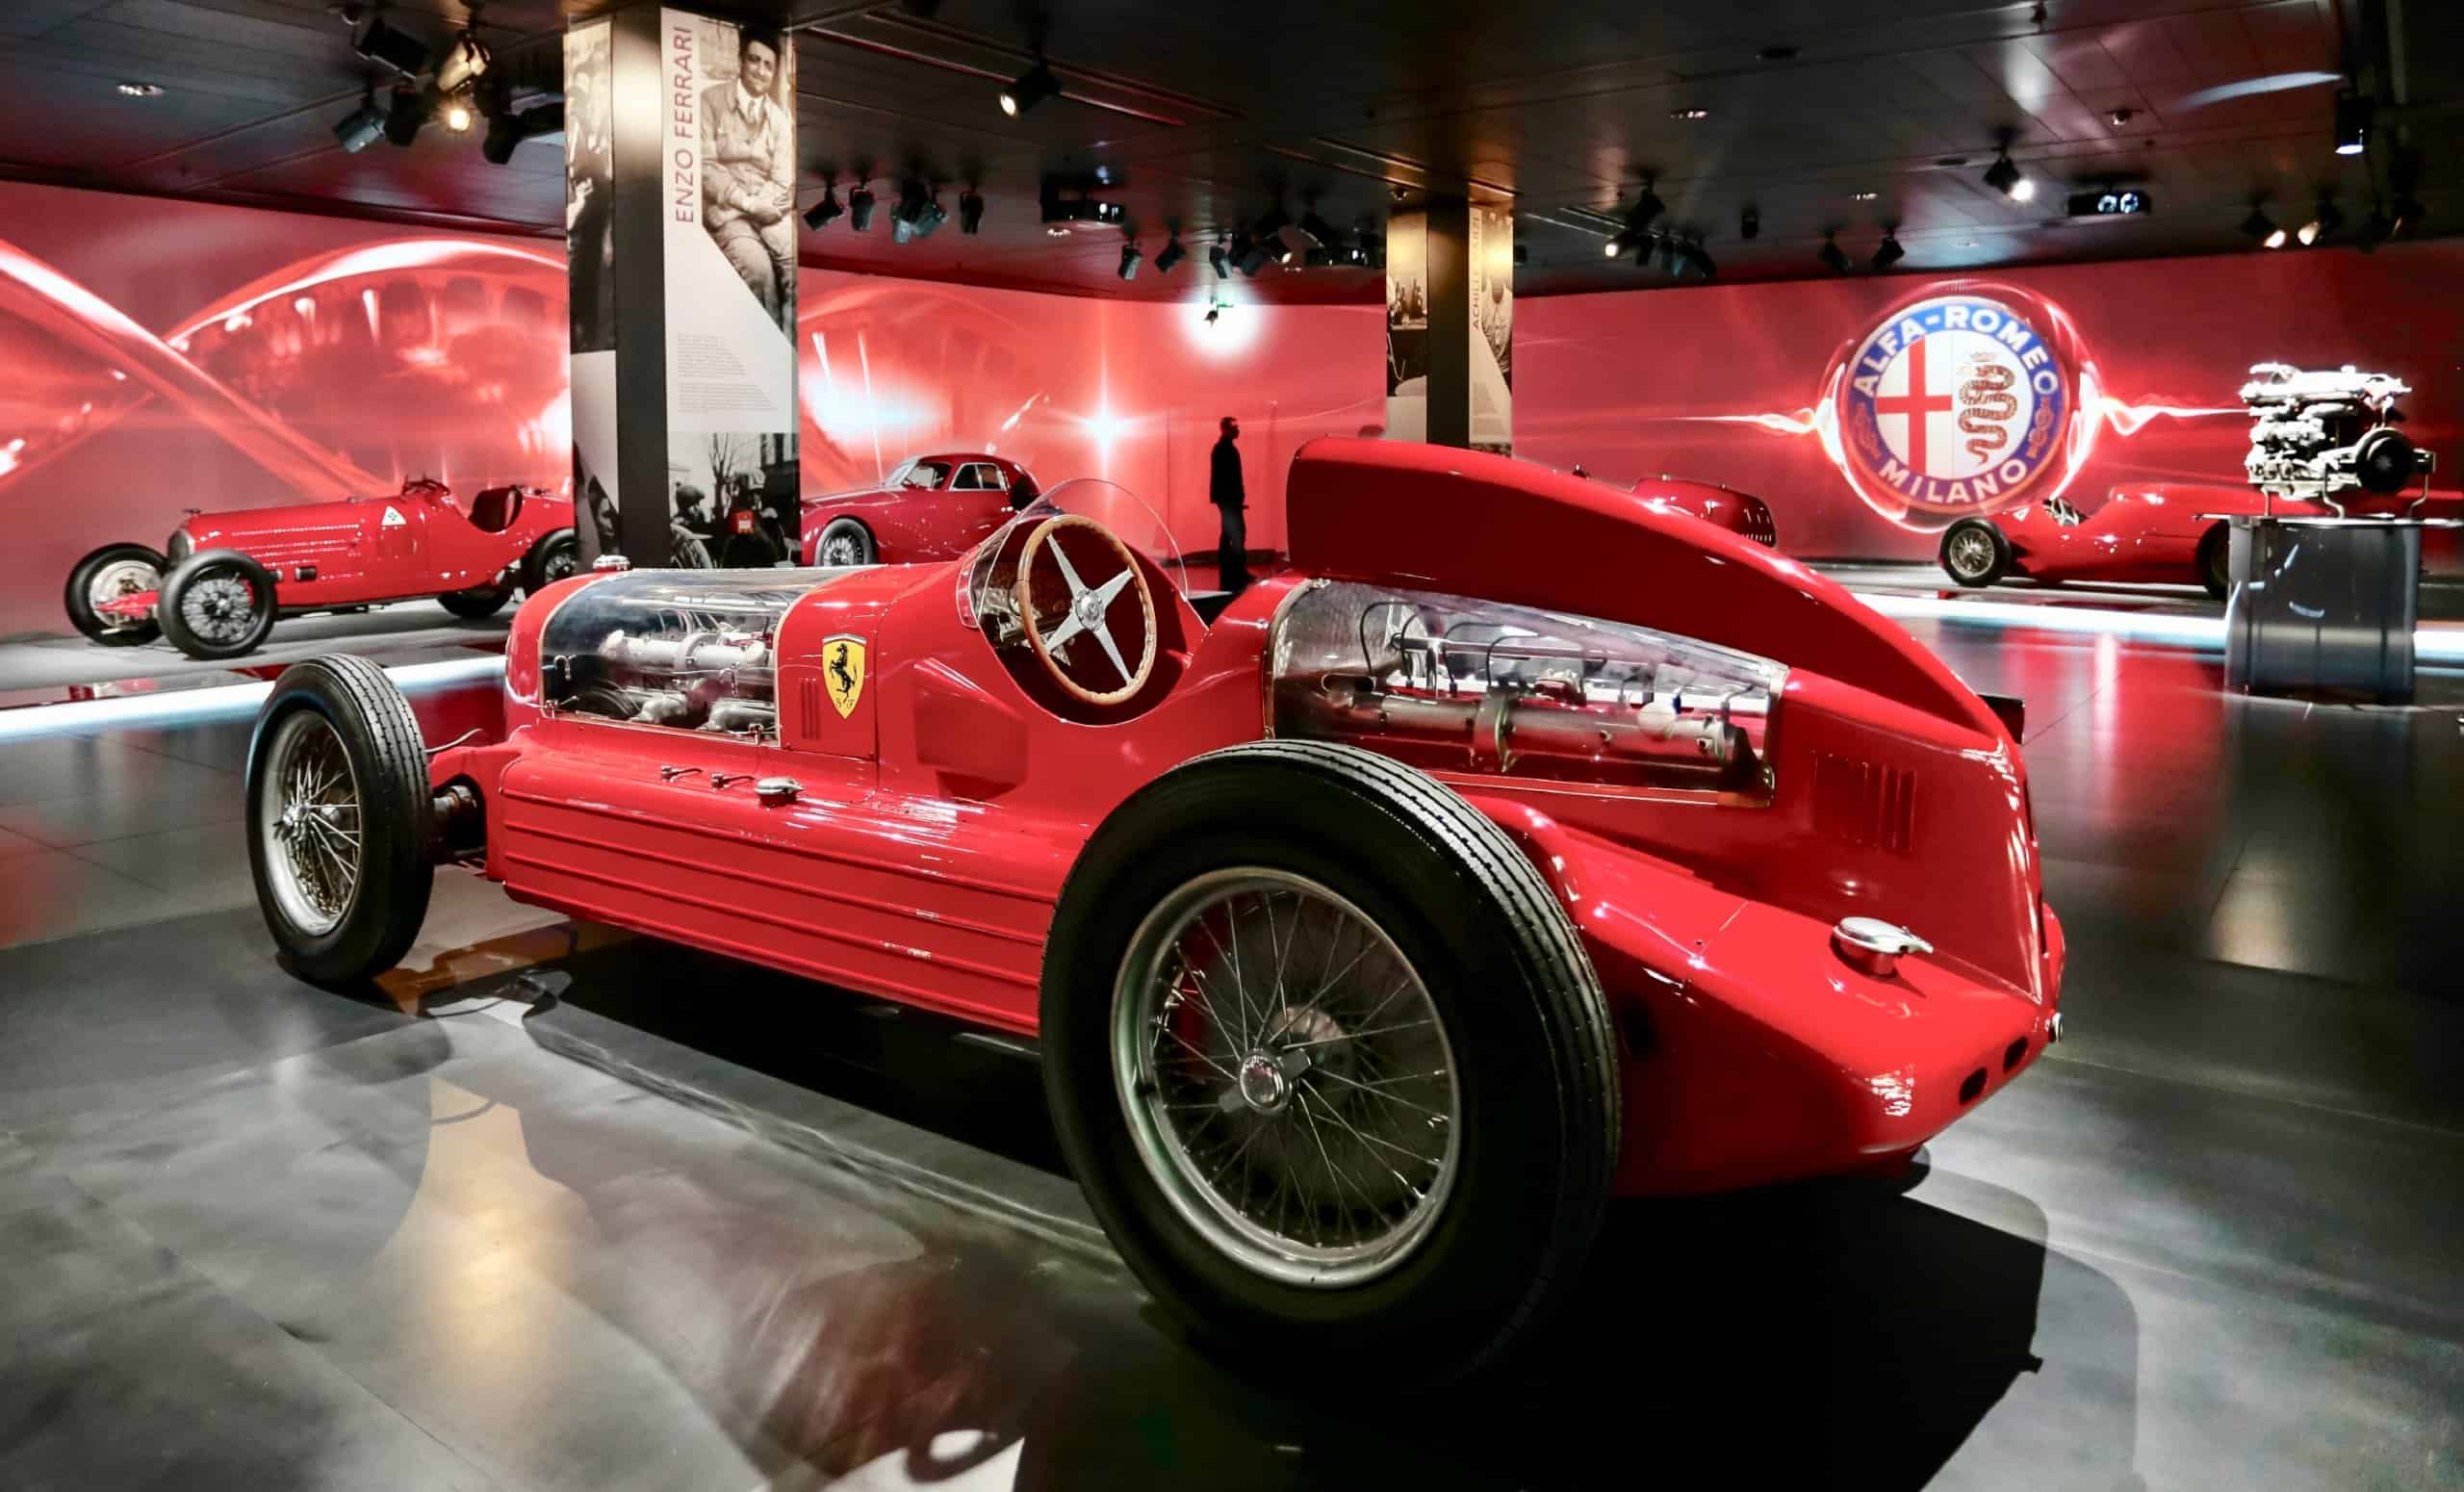 Alfa Romeo Museum, Red-ee for visitors: Alfa Romeo re-opens its museum, ClassicCars.com Journal